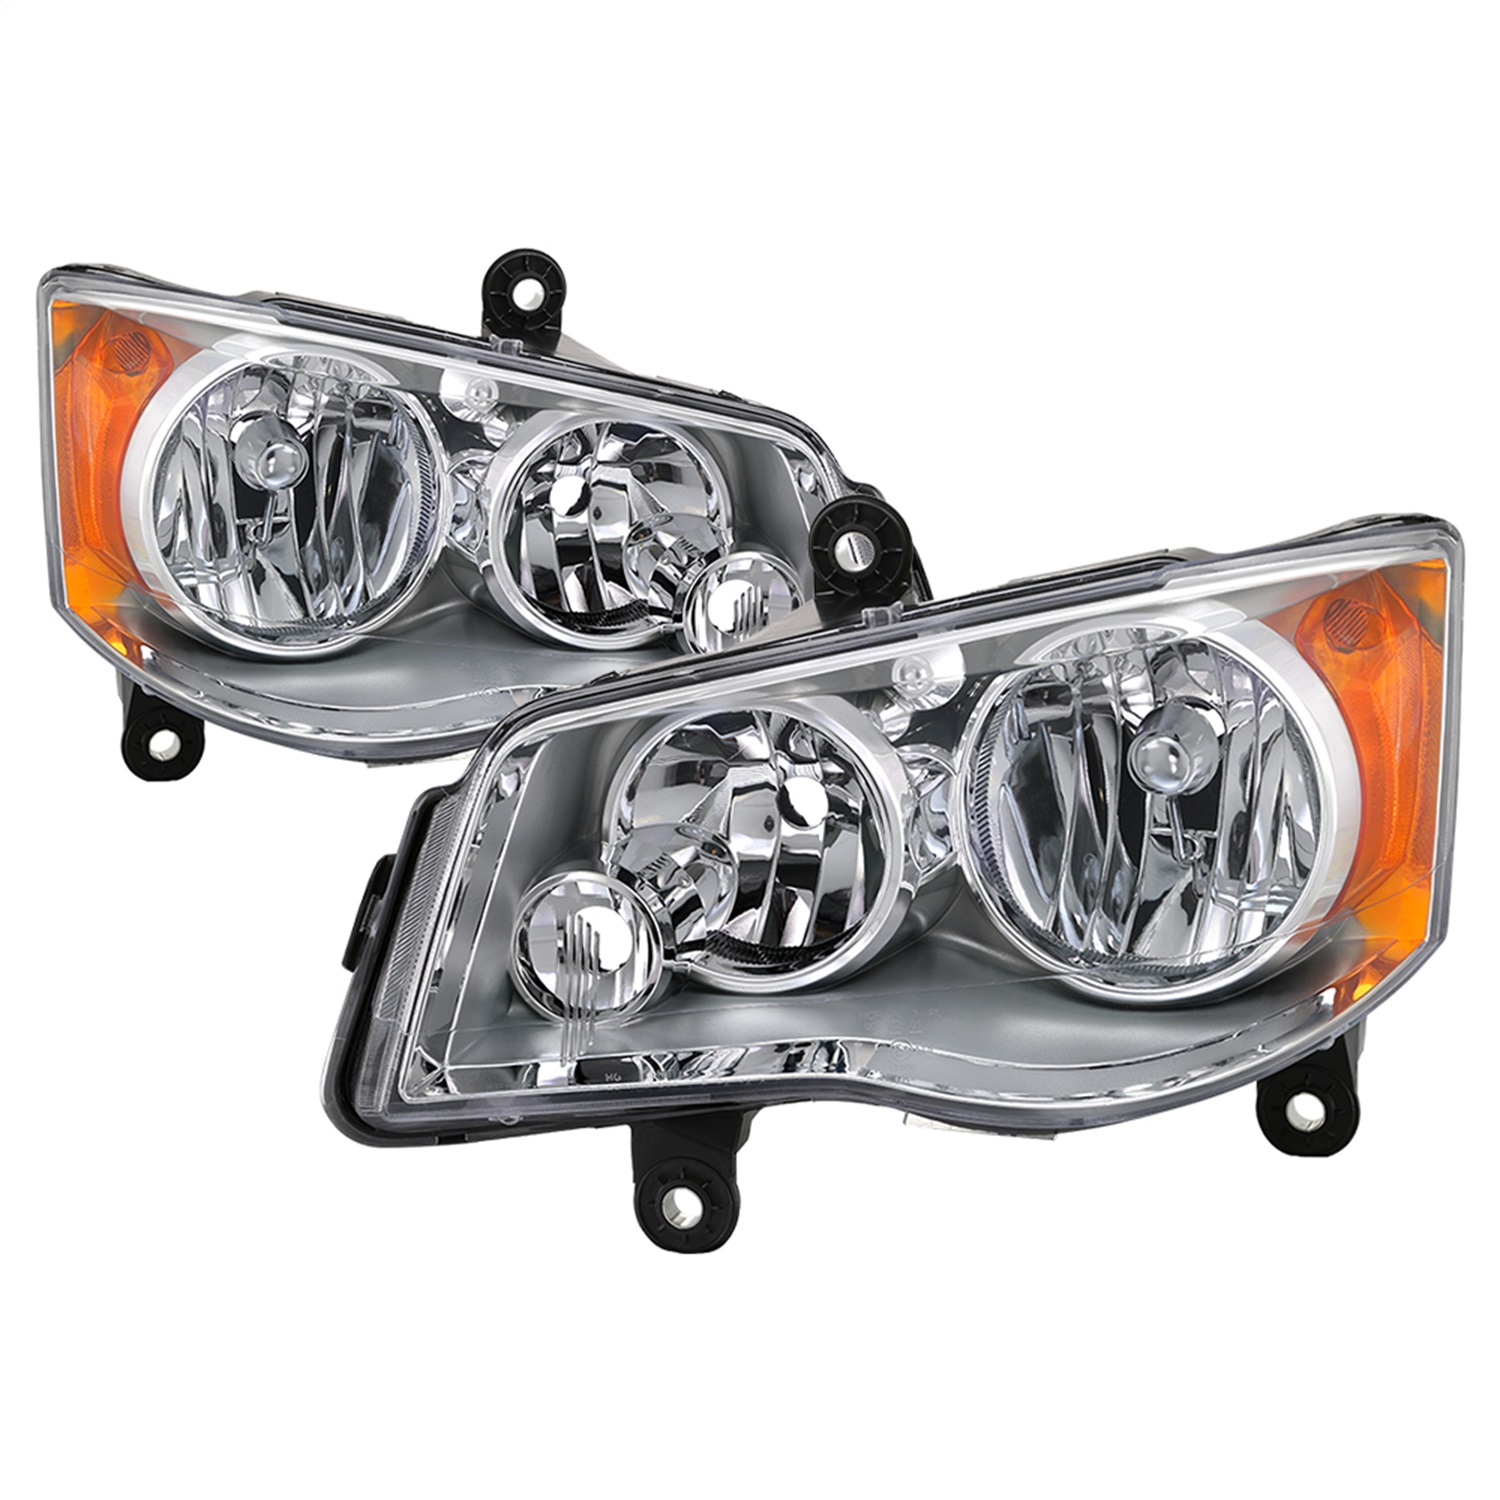 Spyder Auto 9042508 Headlights Fits 08-17 Grand Caravan Town & Country